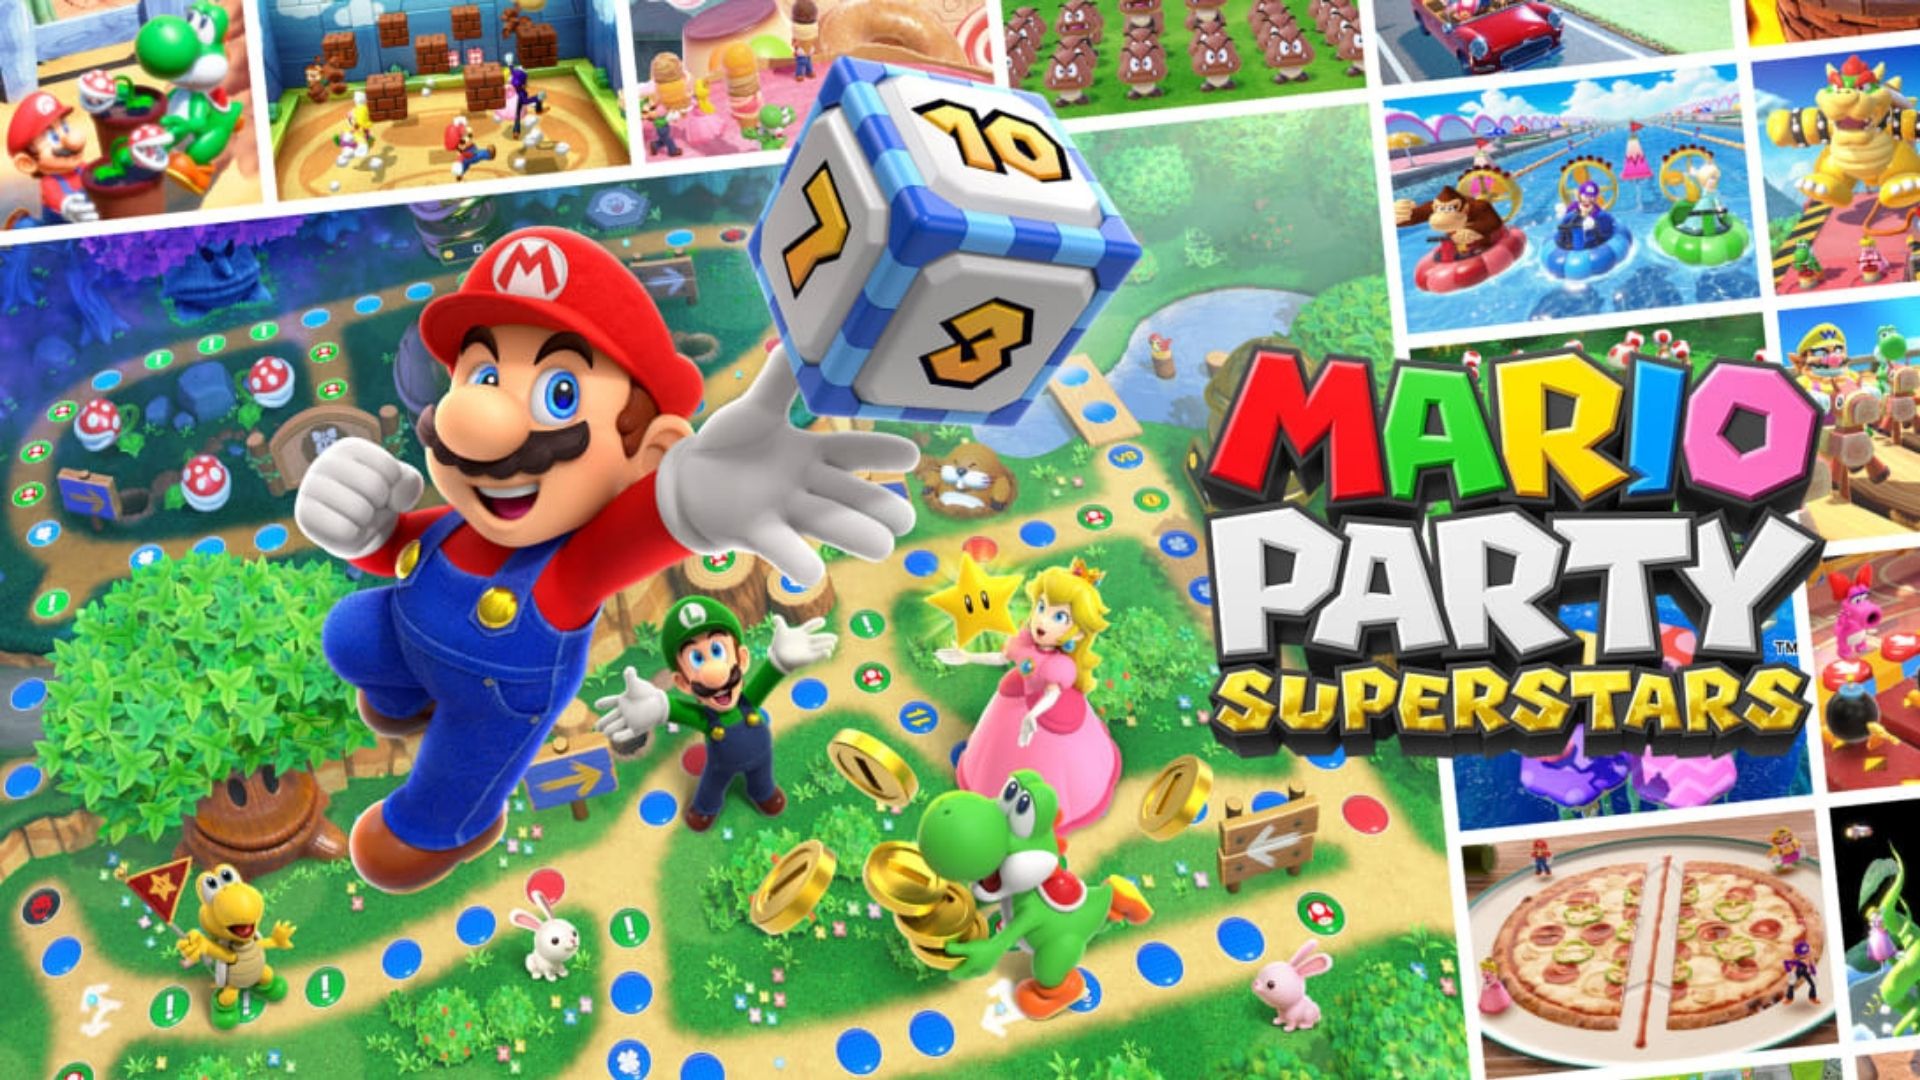 Super Mario Party Gameplay Pt. 1 - Nintendo Treehouse: Live